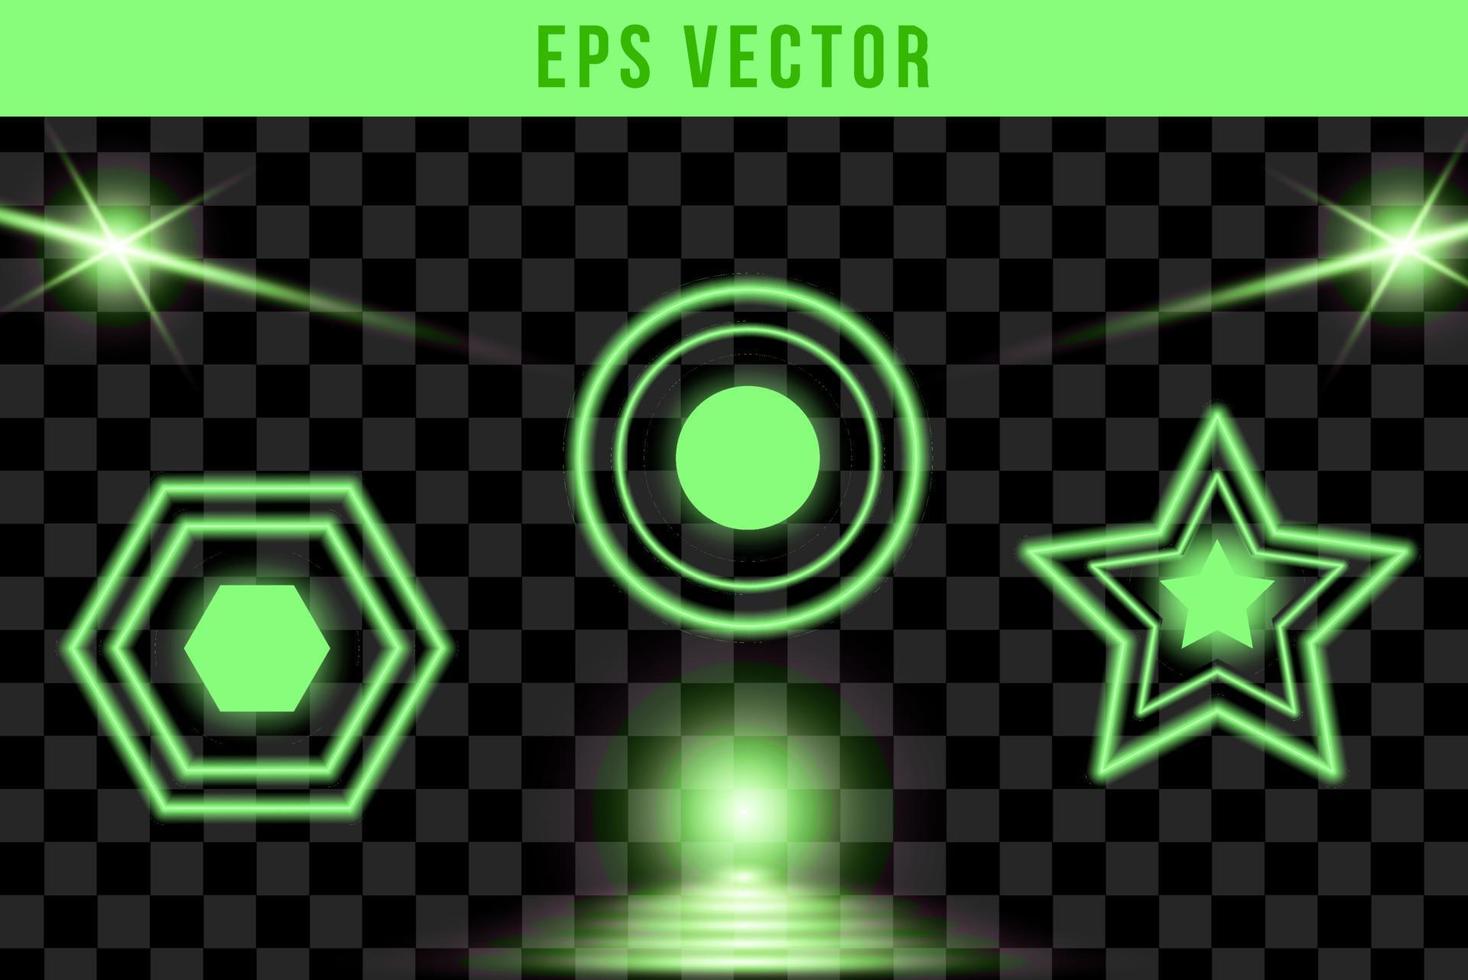 Lens flare on random object. Light glow effect. Green sparkle and glare object. Isolated vector illustration on transparent background.